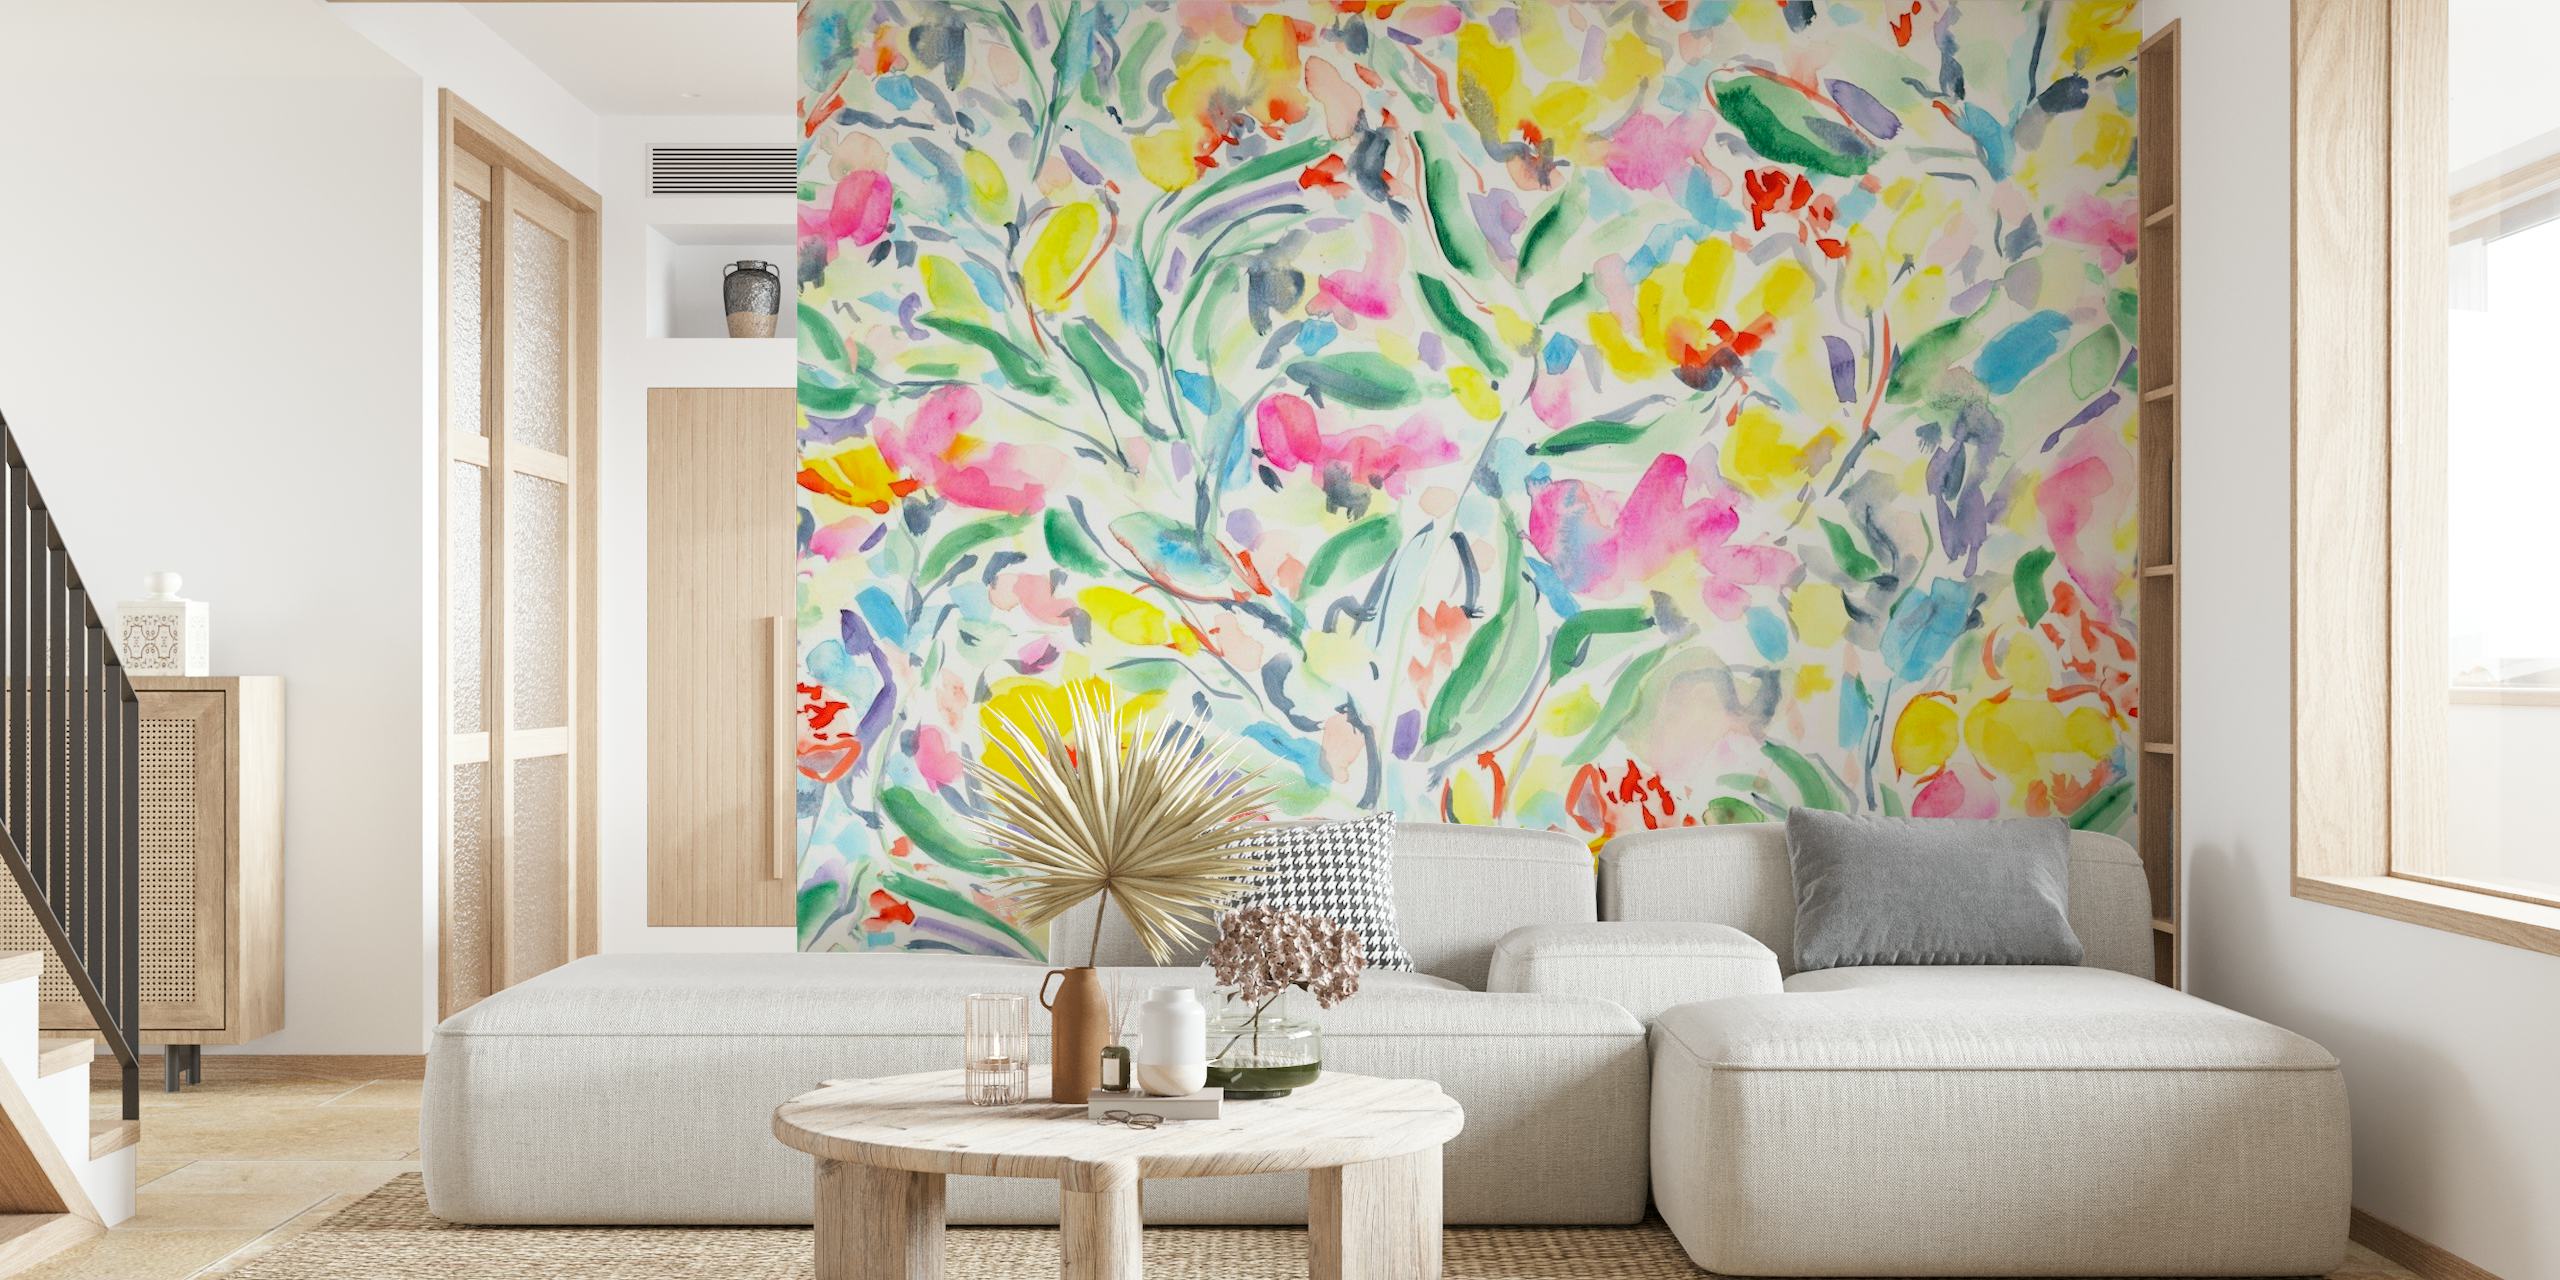 Otherworldly Botanical Abstract Floral wallpaper